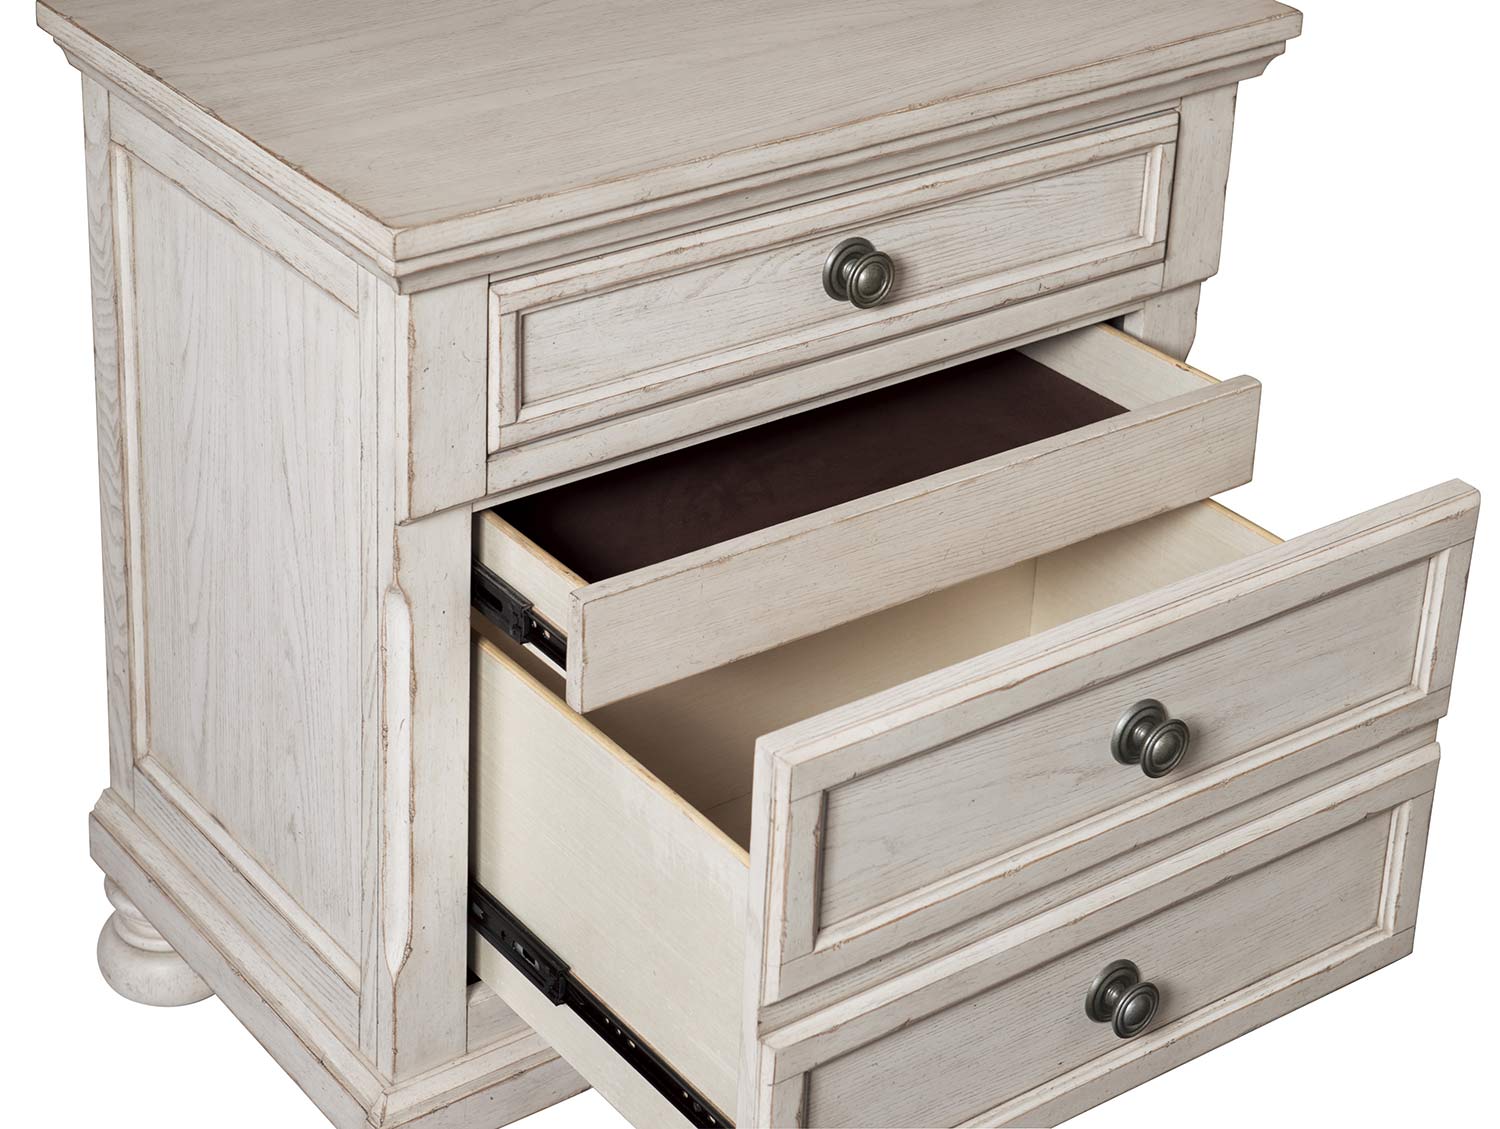 Homelegance Bethel Night Stand - Wire-brushed White